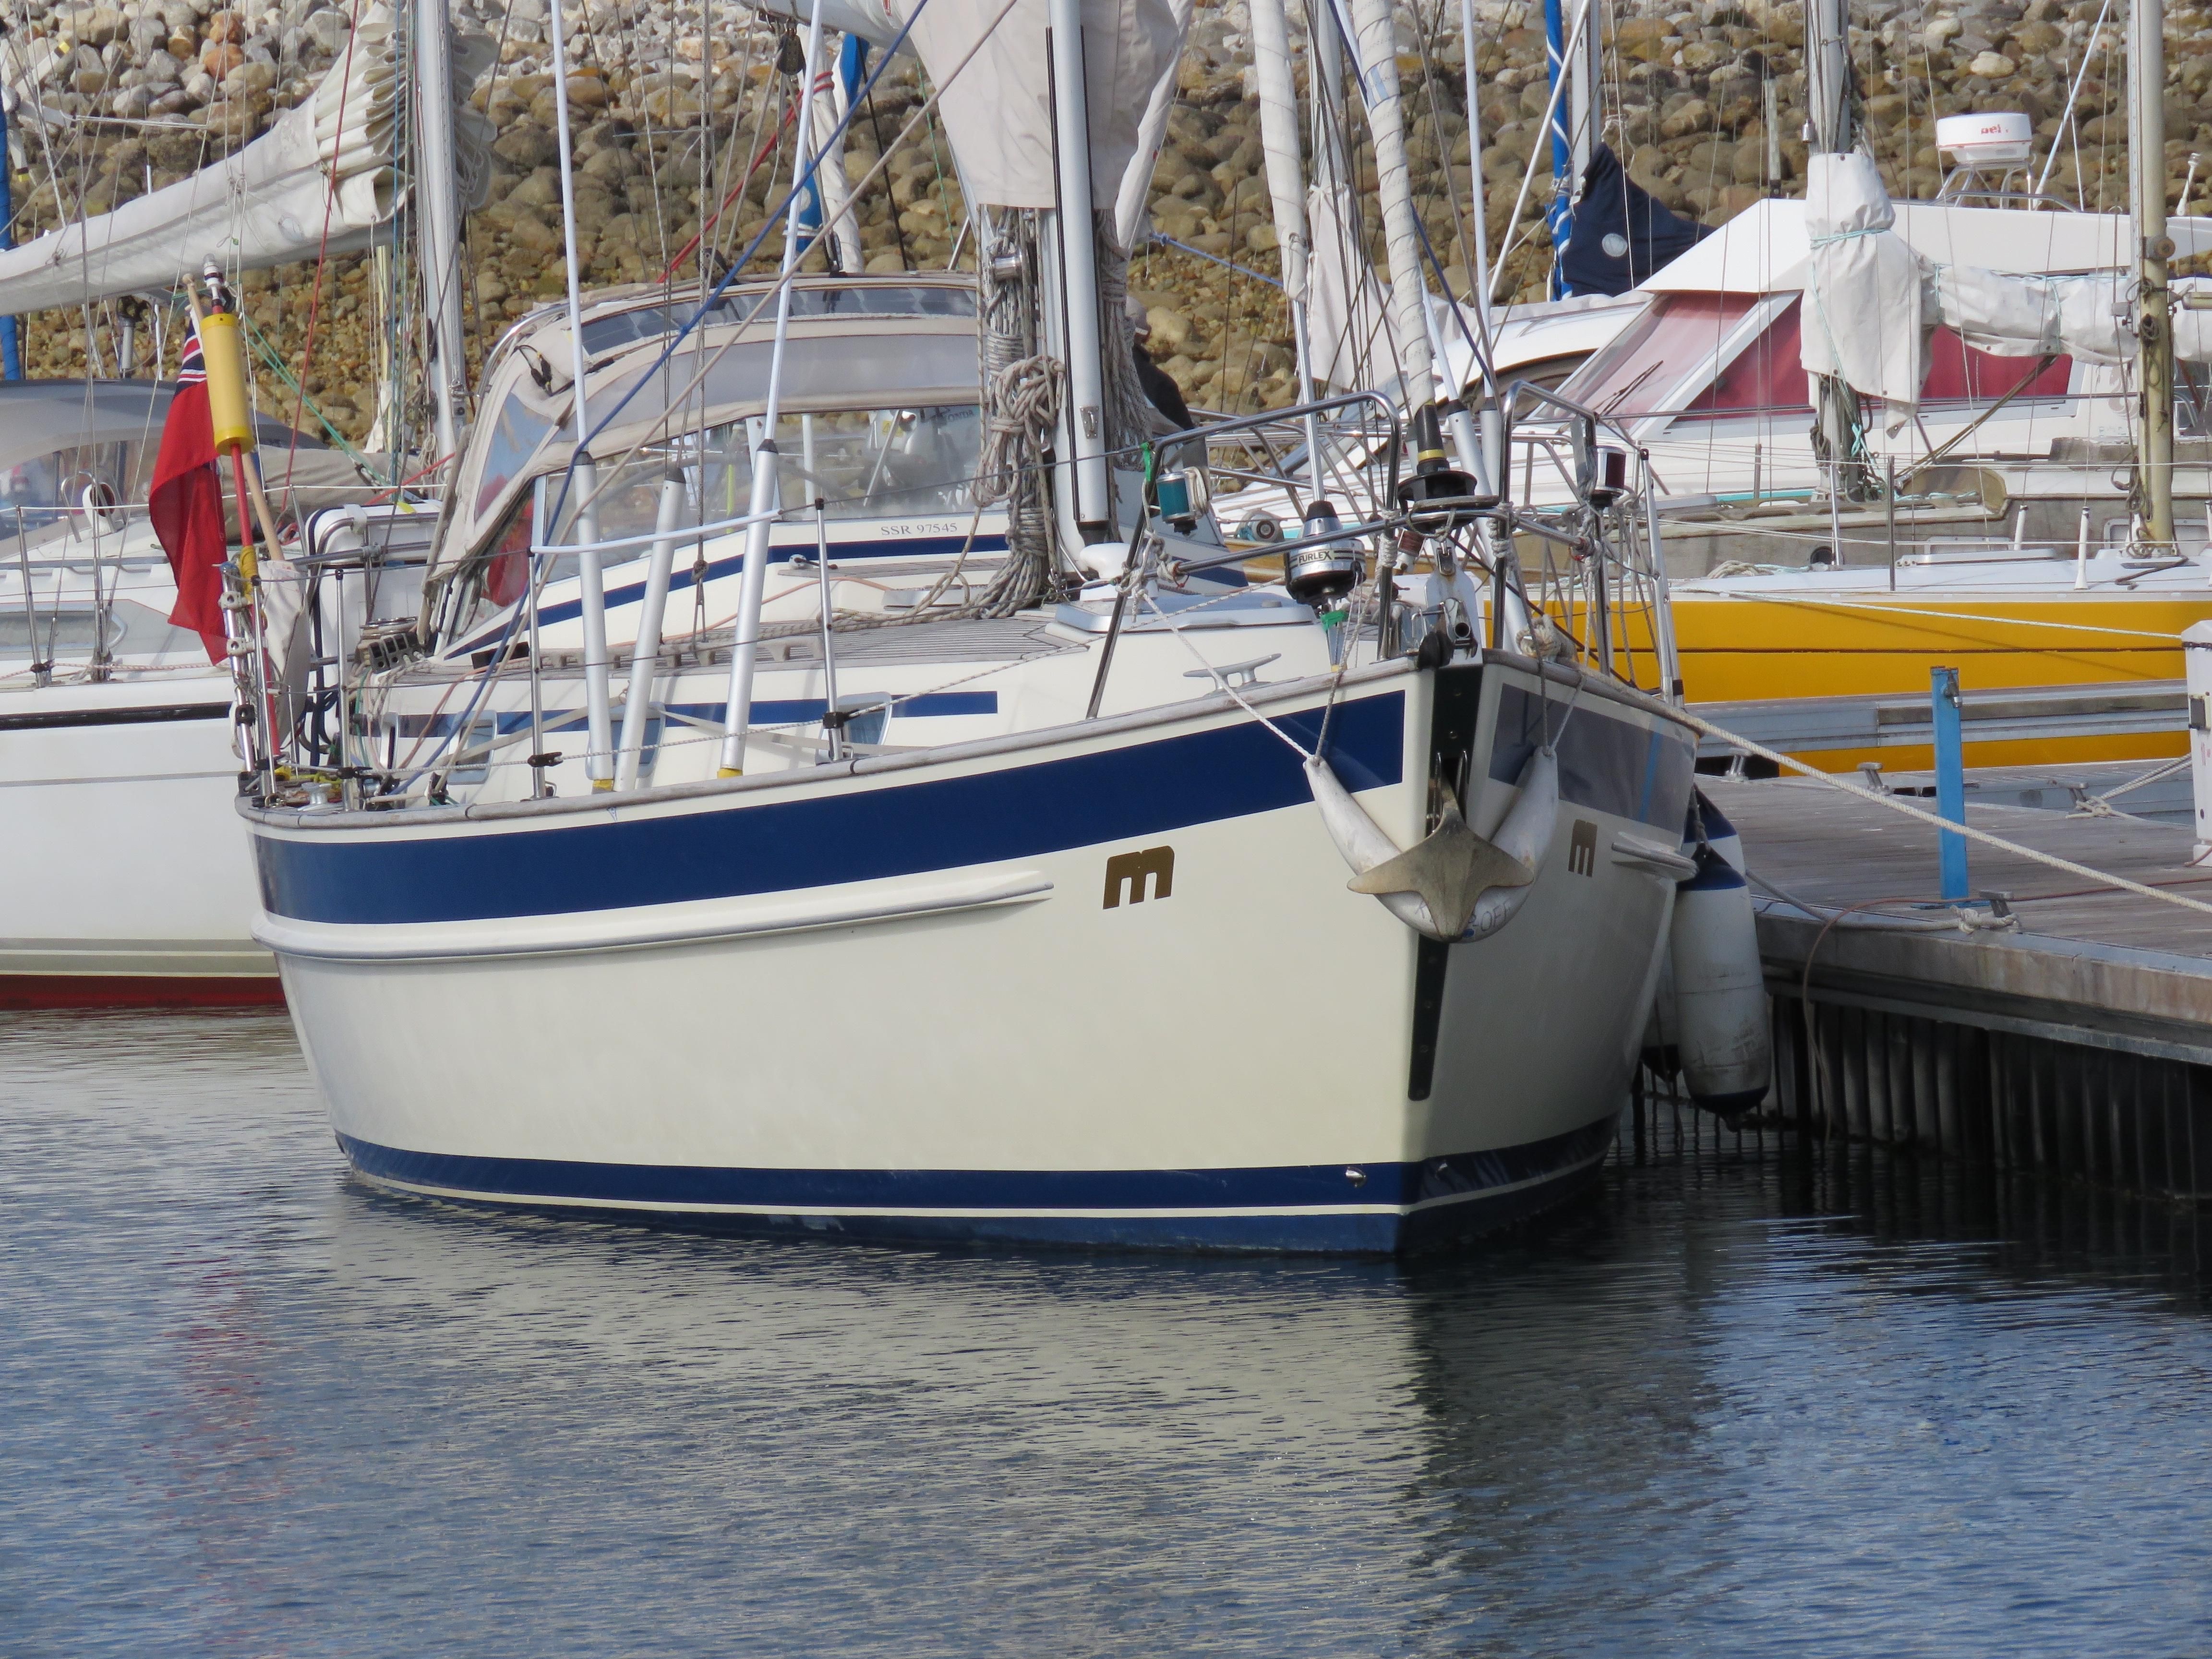 malo 36 yacht for sale